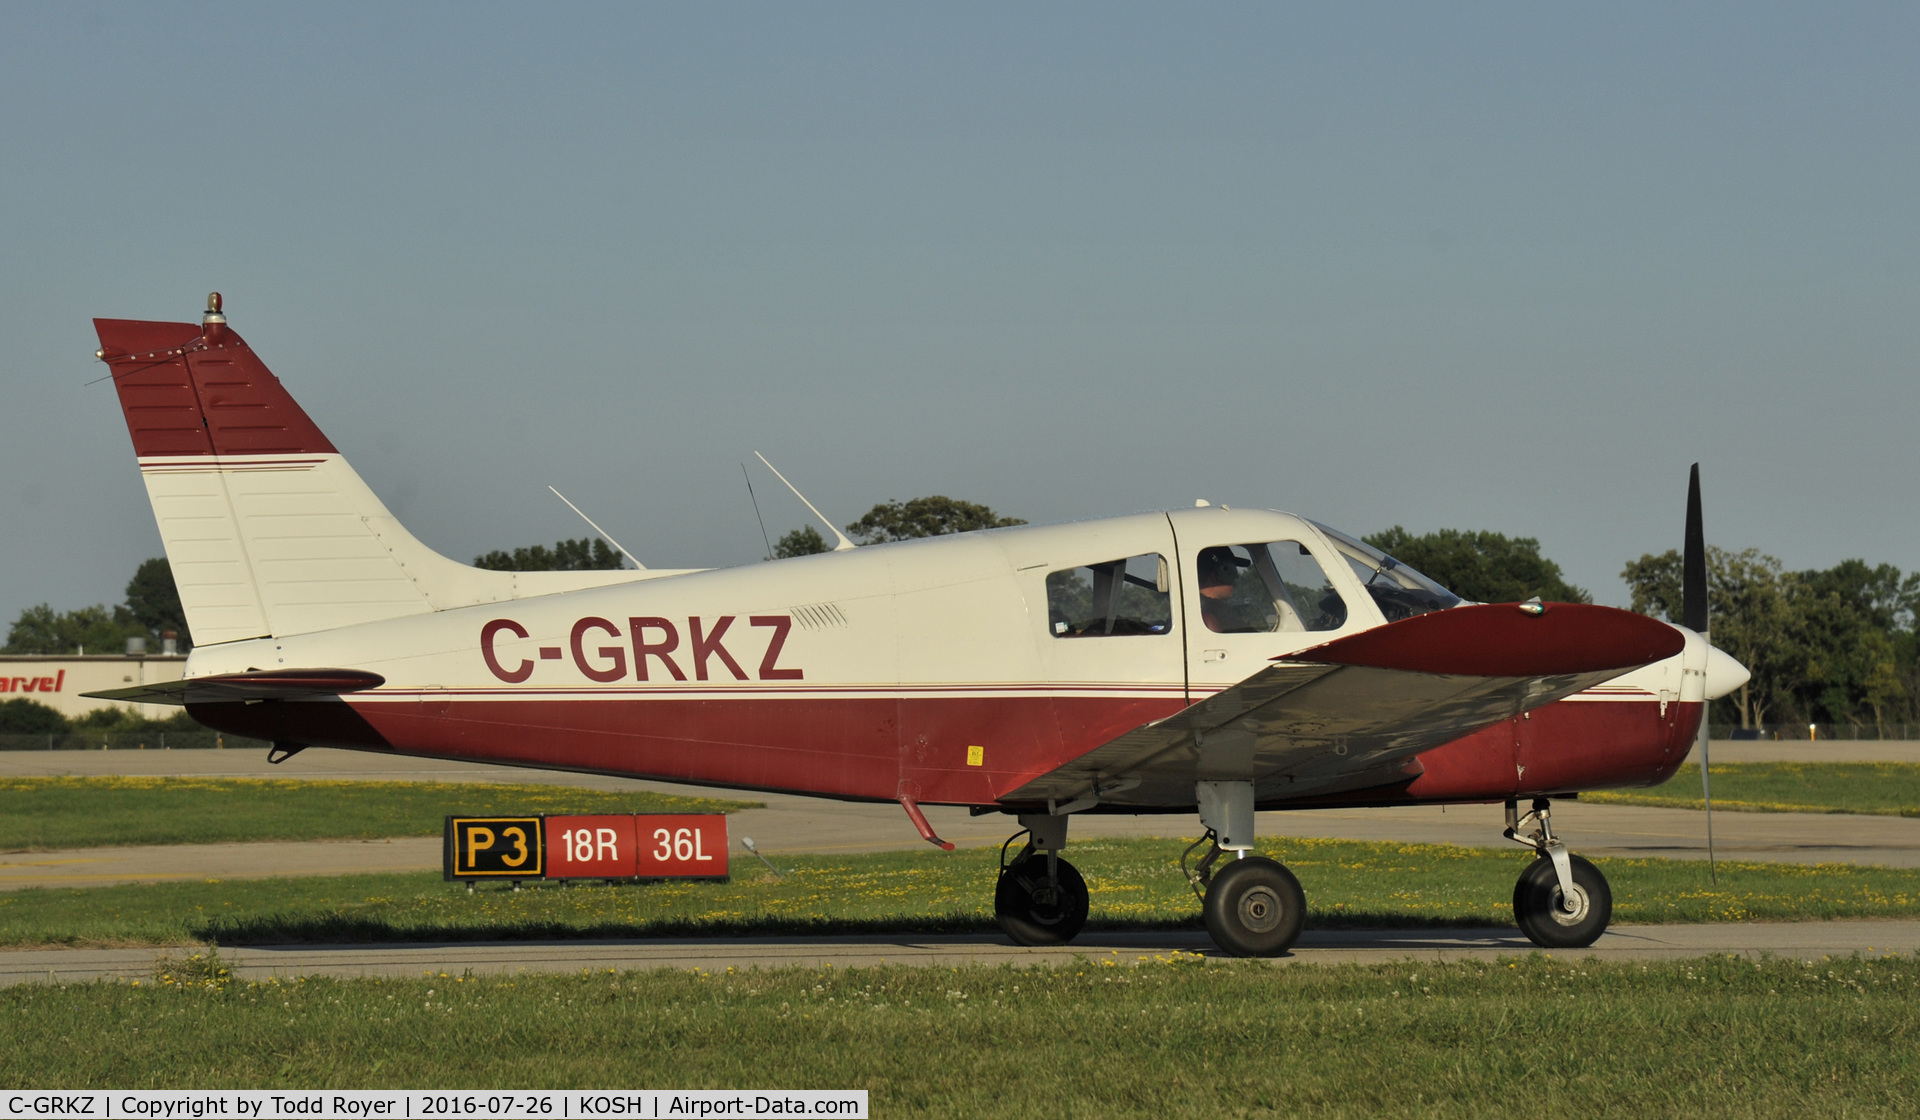 C-GRKZ, 1974 Piper PA-28-140 C/N 28-745072, Taxiing at Airventure 2016